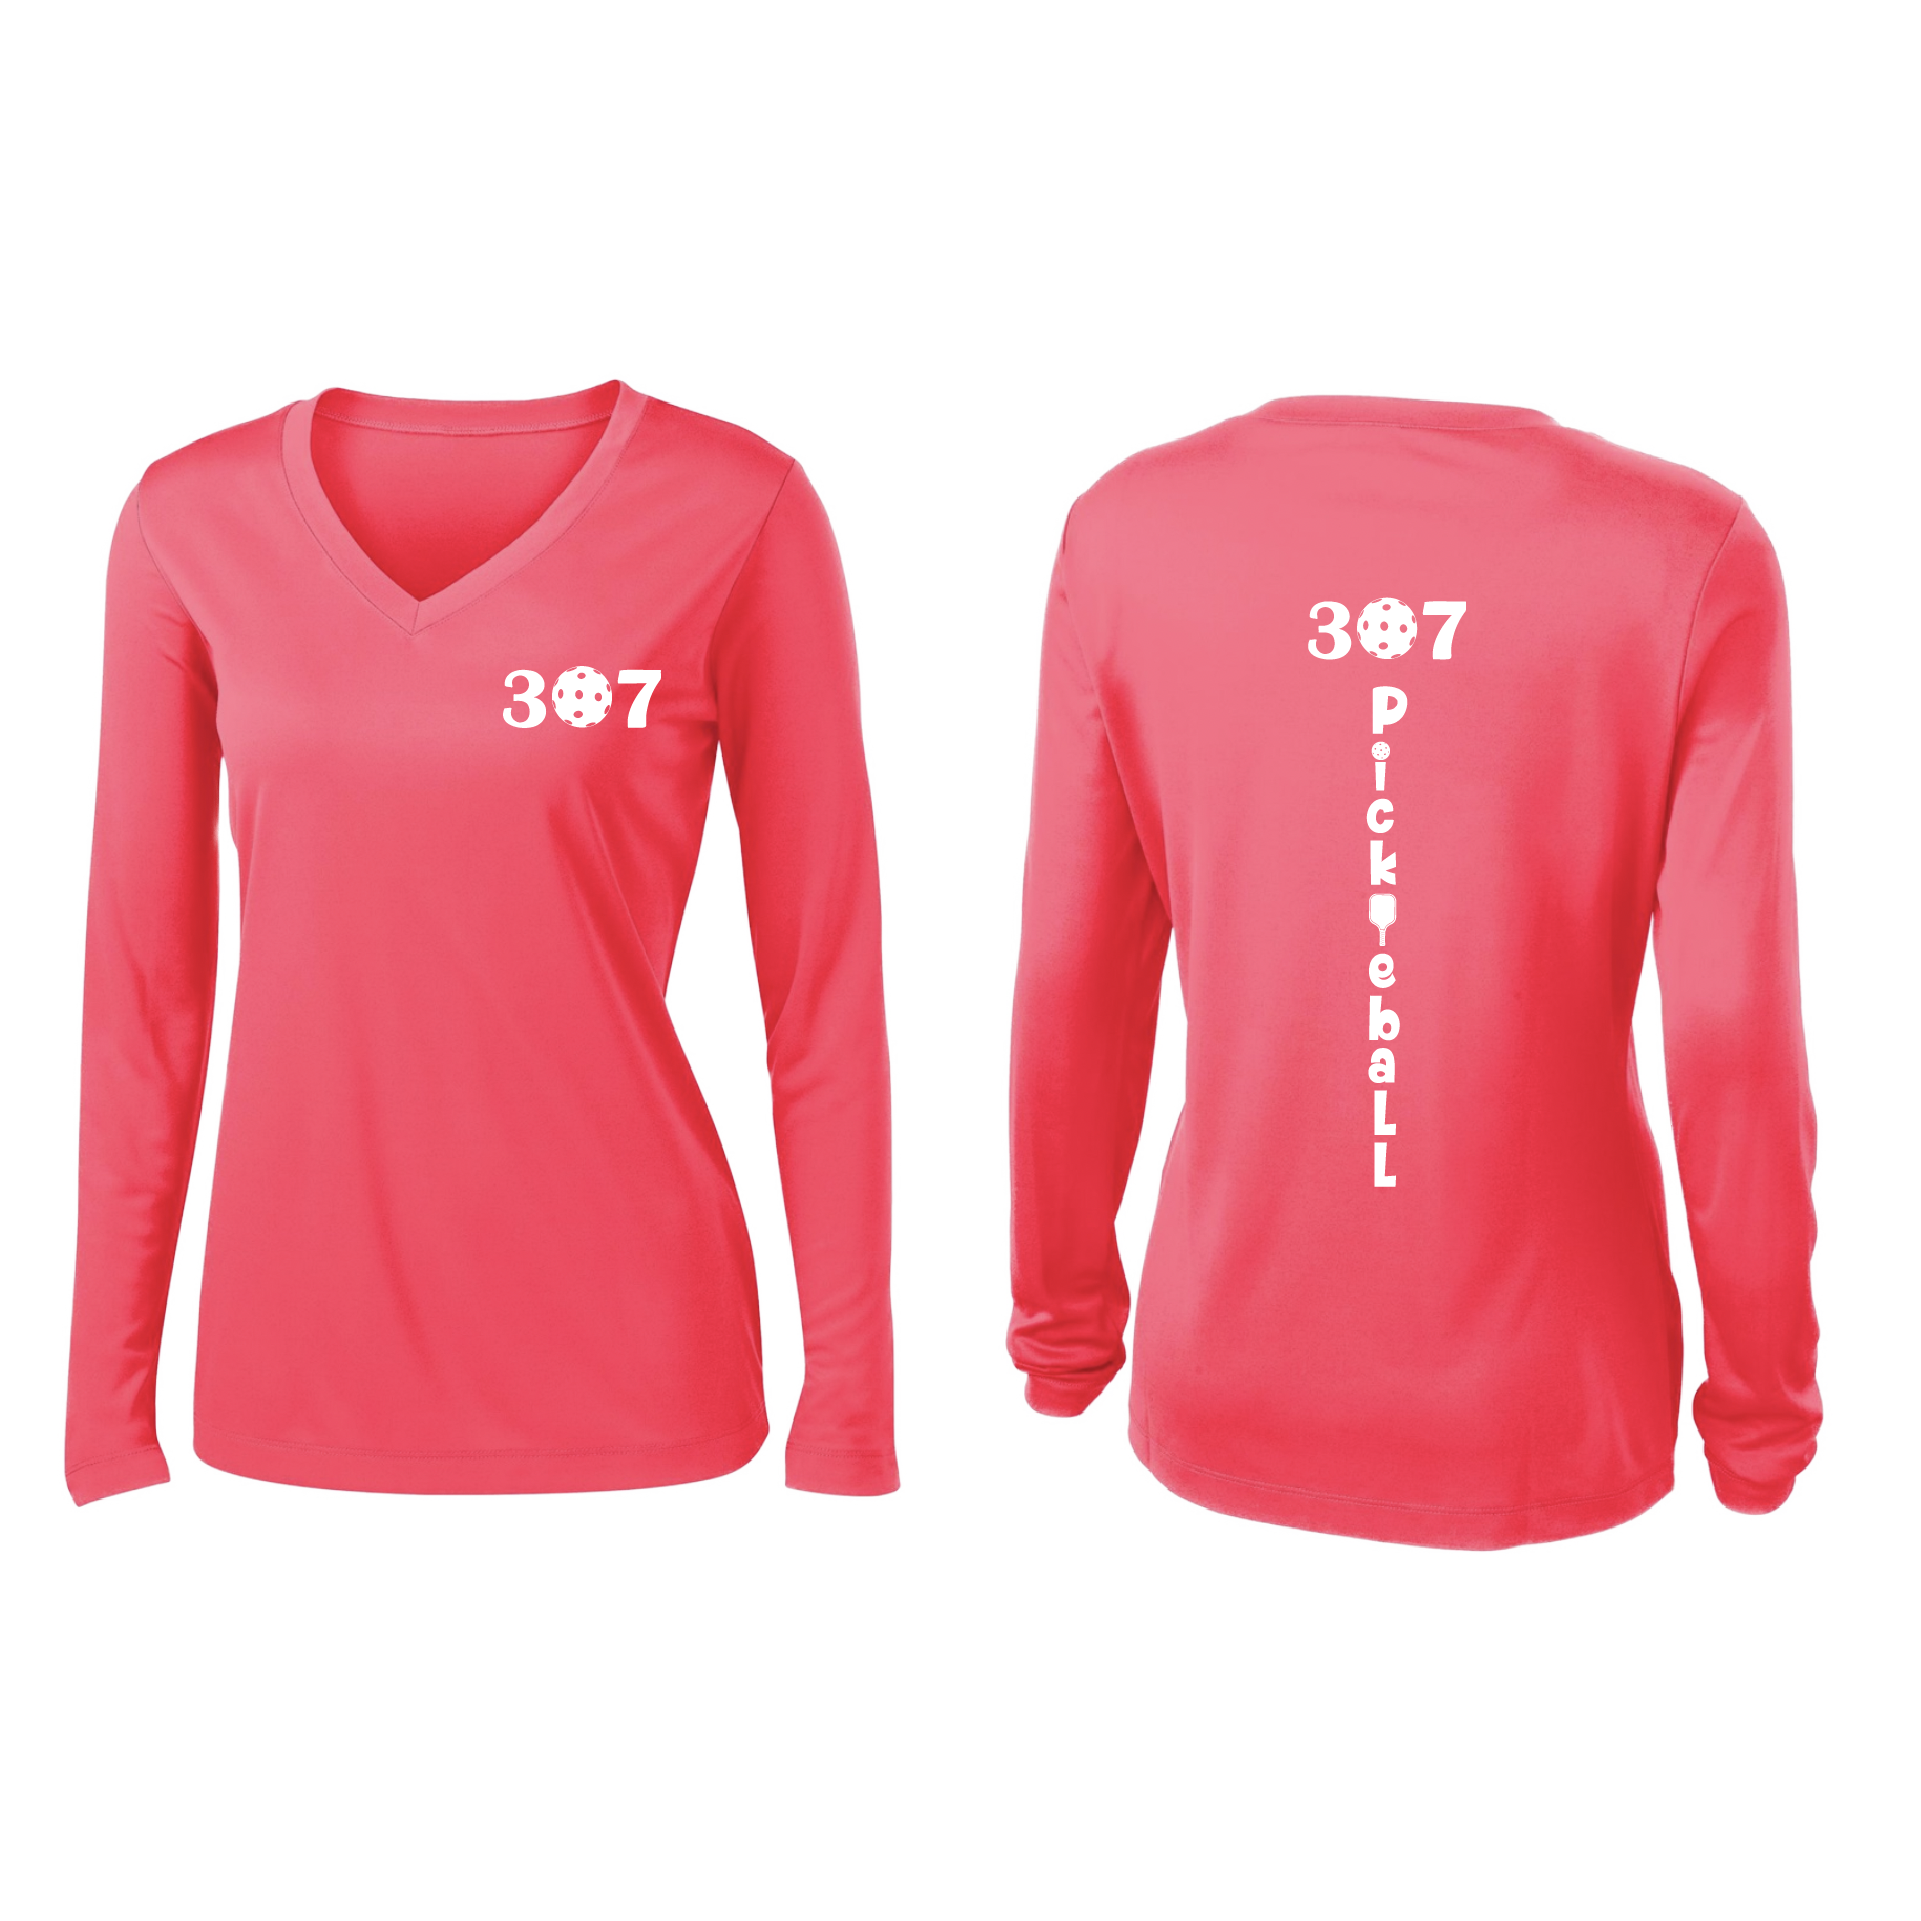 Design: 307 Wyoming Pickleball Club  Women's Style: Long-Sleeve V-Neck  Turn up the volume in this Women's shirt with its perfect mix of softness and attitude. Material is ultra-comfortable with moisture wicking properties and tri-blend softness. PosiCharge technology locks in color. Highly breathable and lightweight.